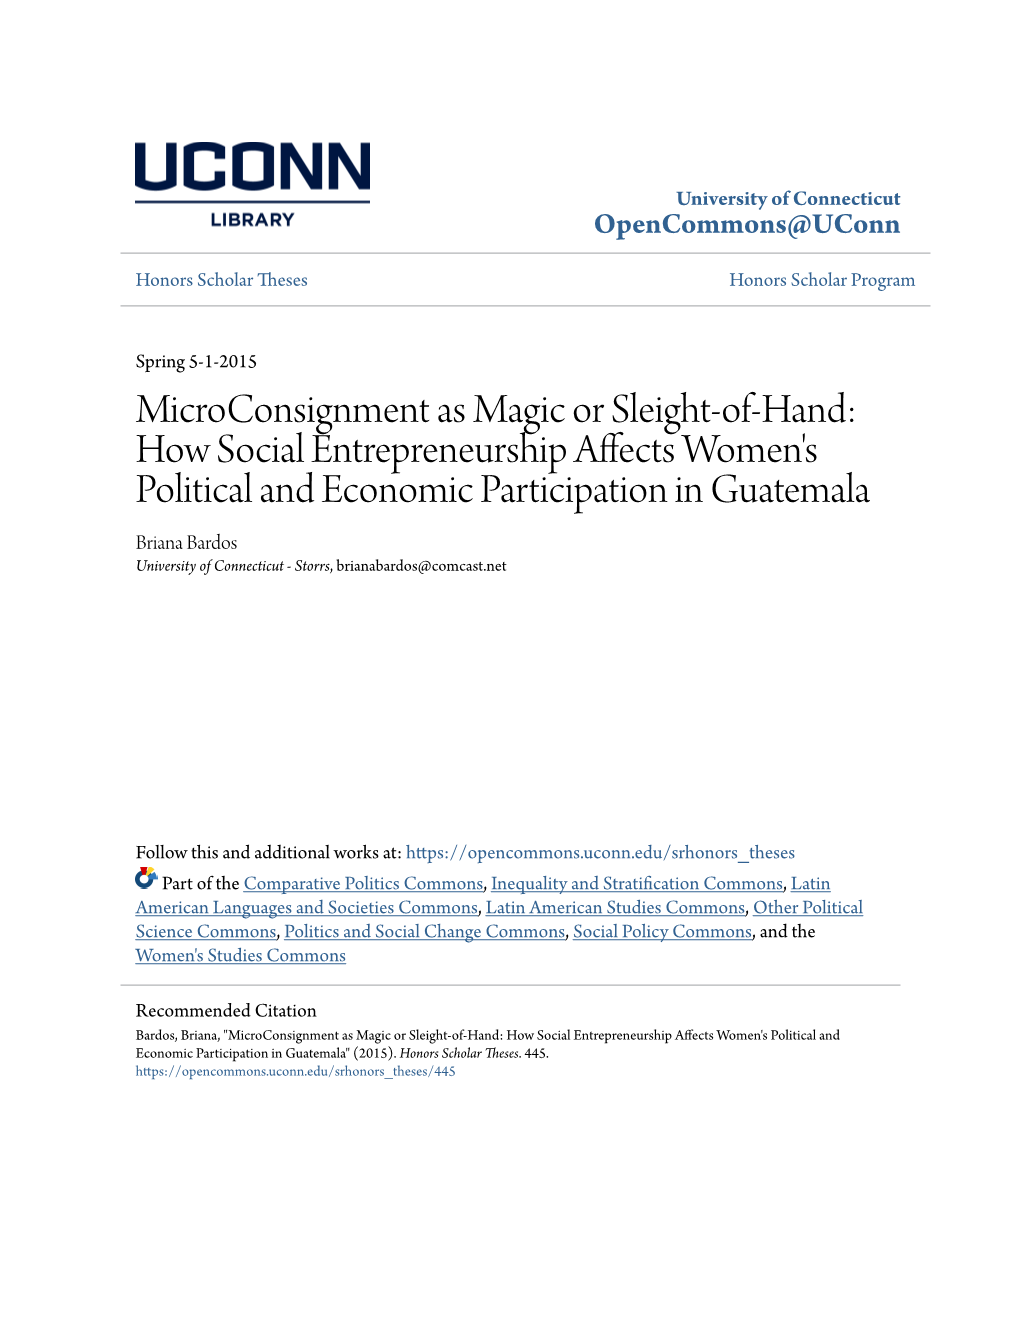 Microconsignment As Magic Or Sleight-Of-Hand: How Social Entrepreneurship Affects Women's Political and Economic Participati